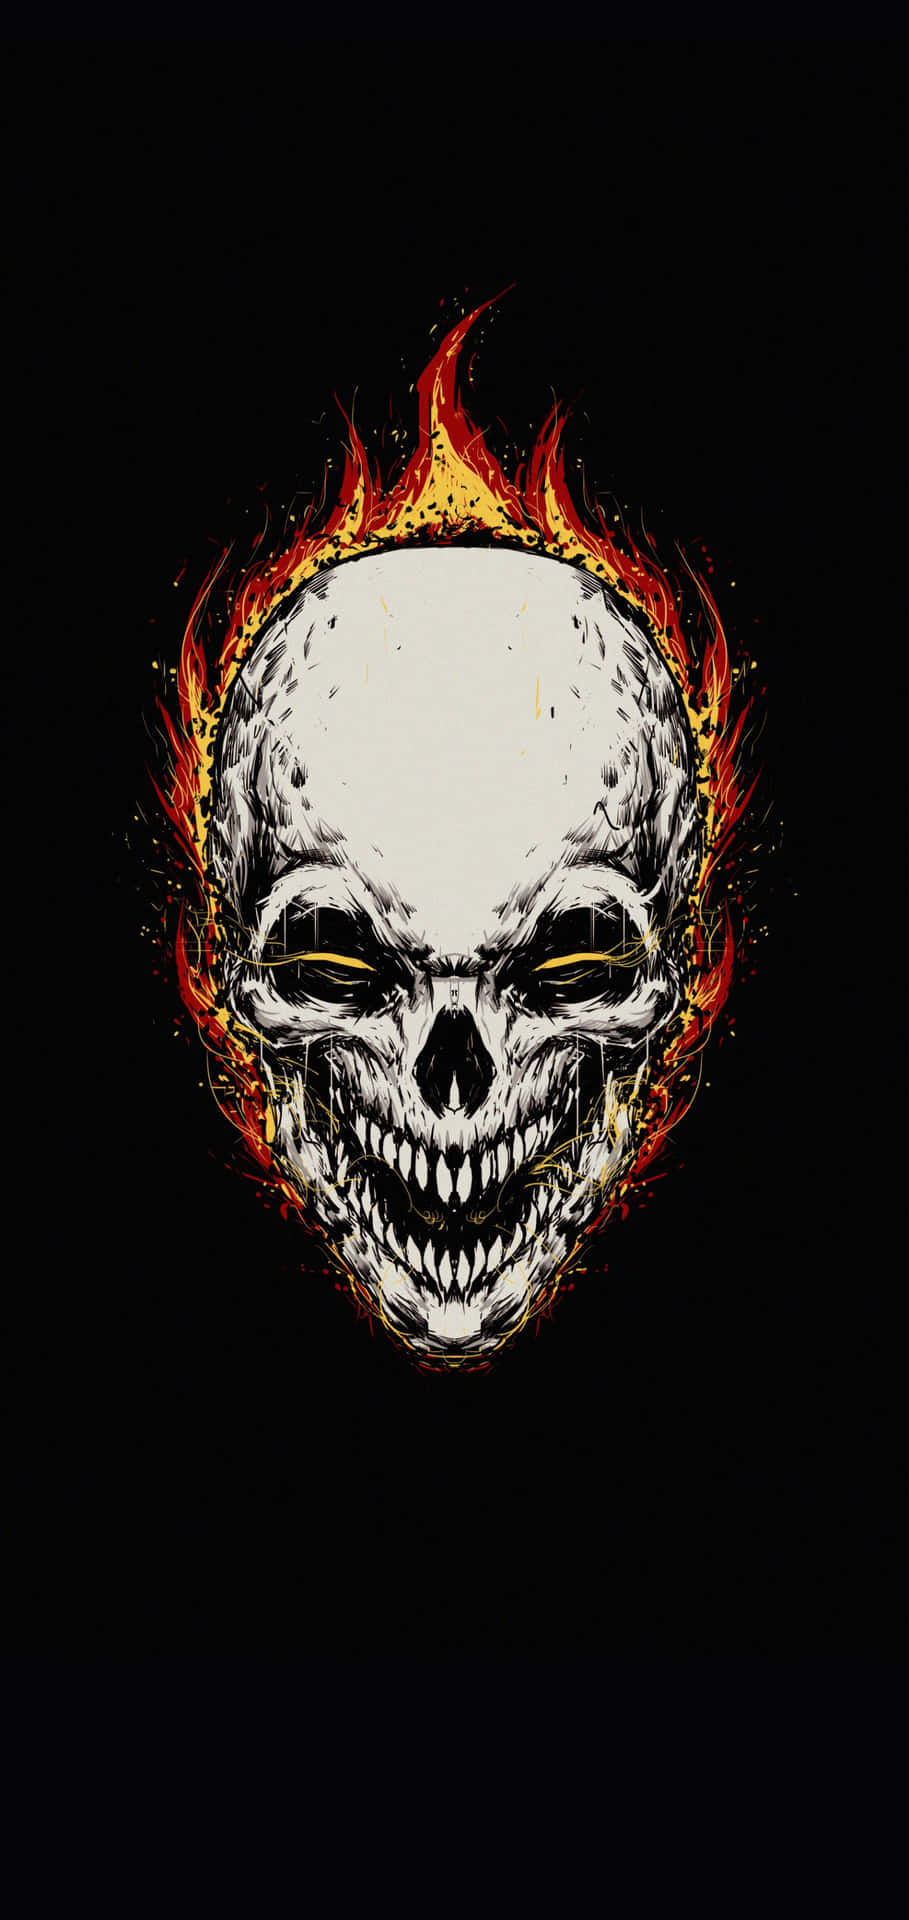 Mysterious and Captivating Galaxy Skull Wallpaper